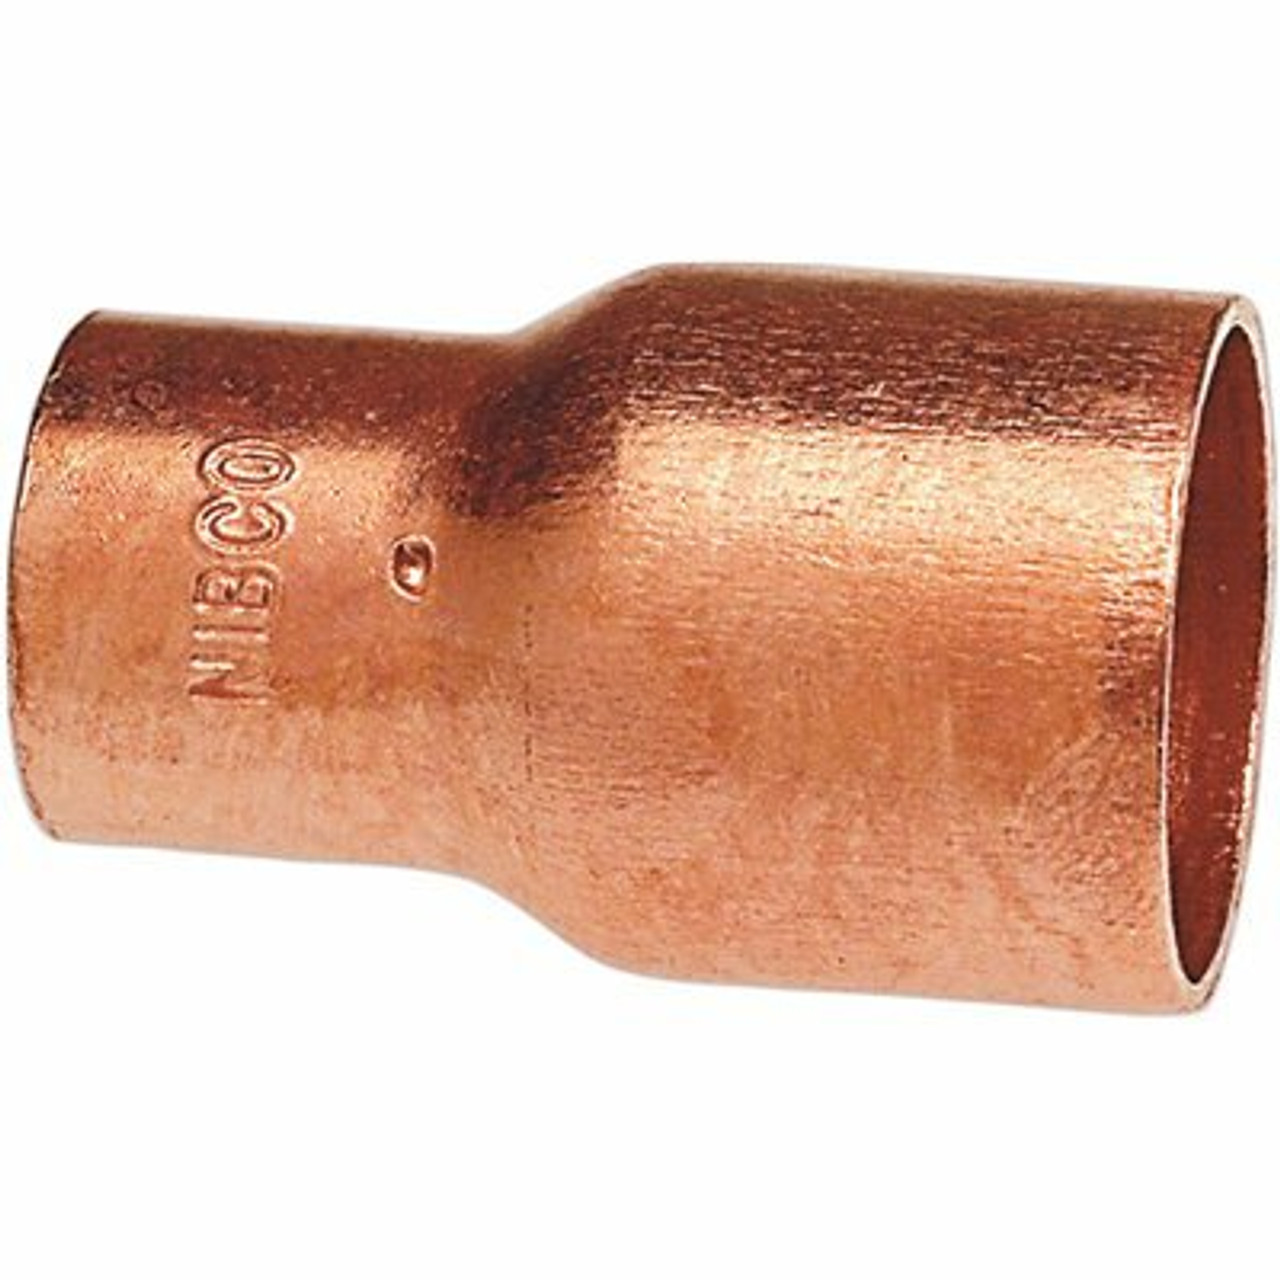 Nibco 2 In. Wrot Copper C X C Dimple Stop Coupling (5-Pack)